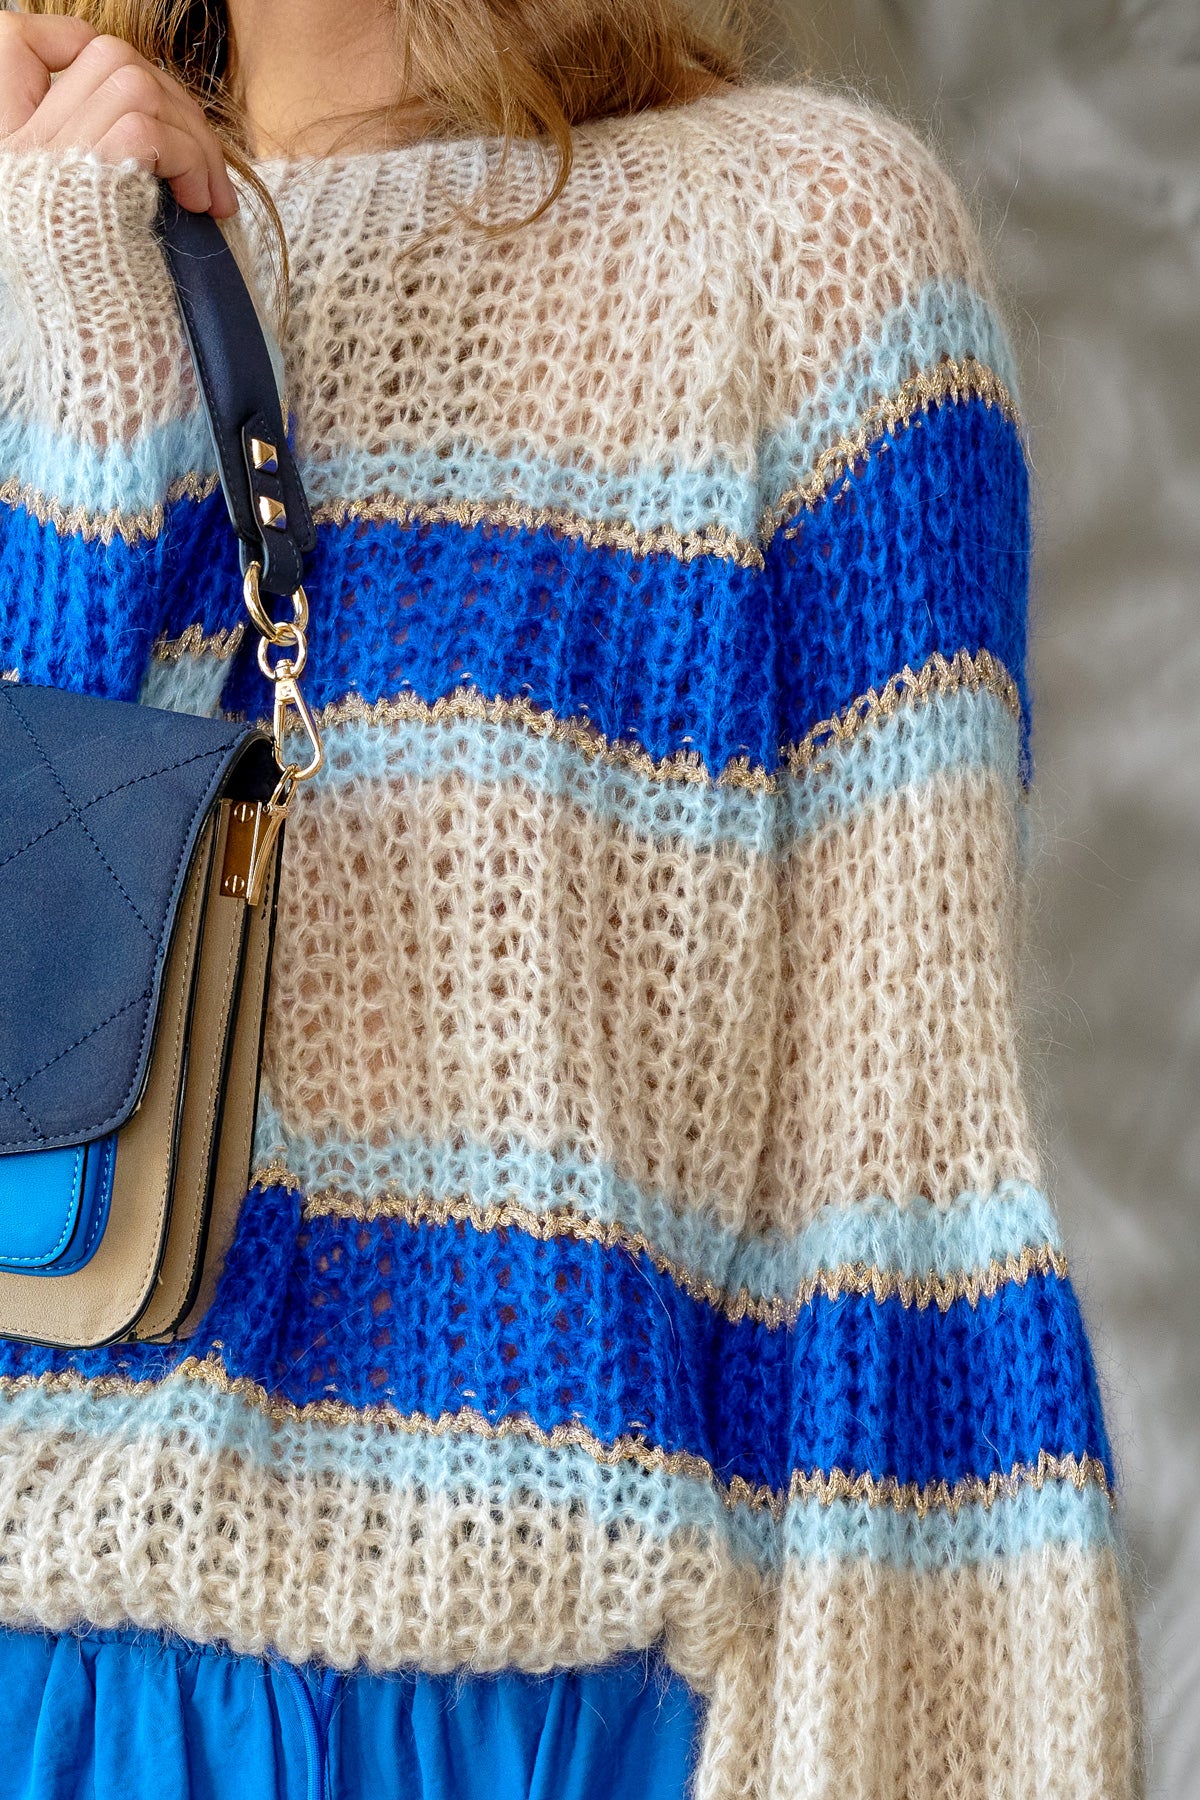 Pacific Knit Sweater - Blue Mix